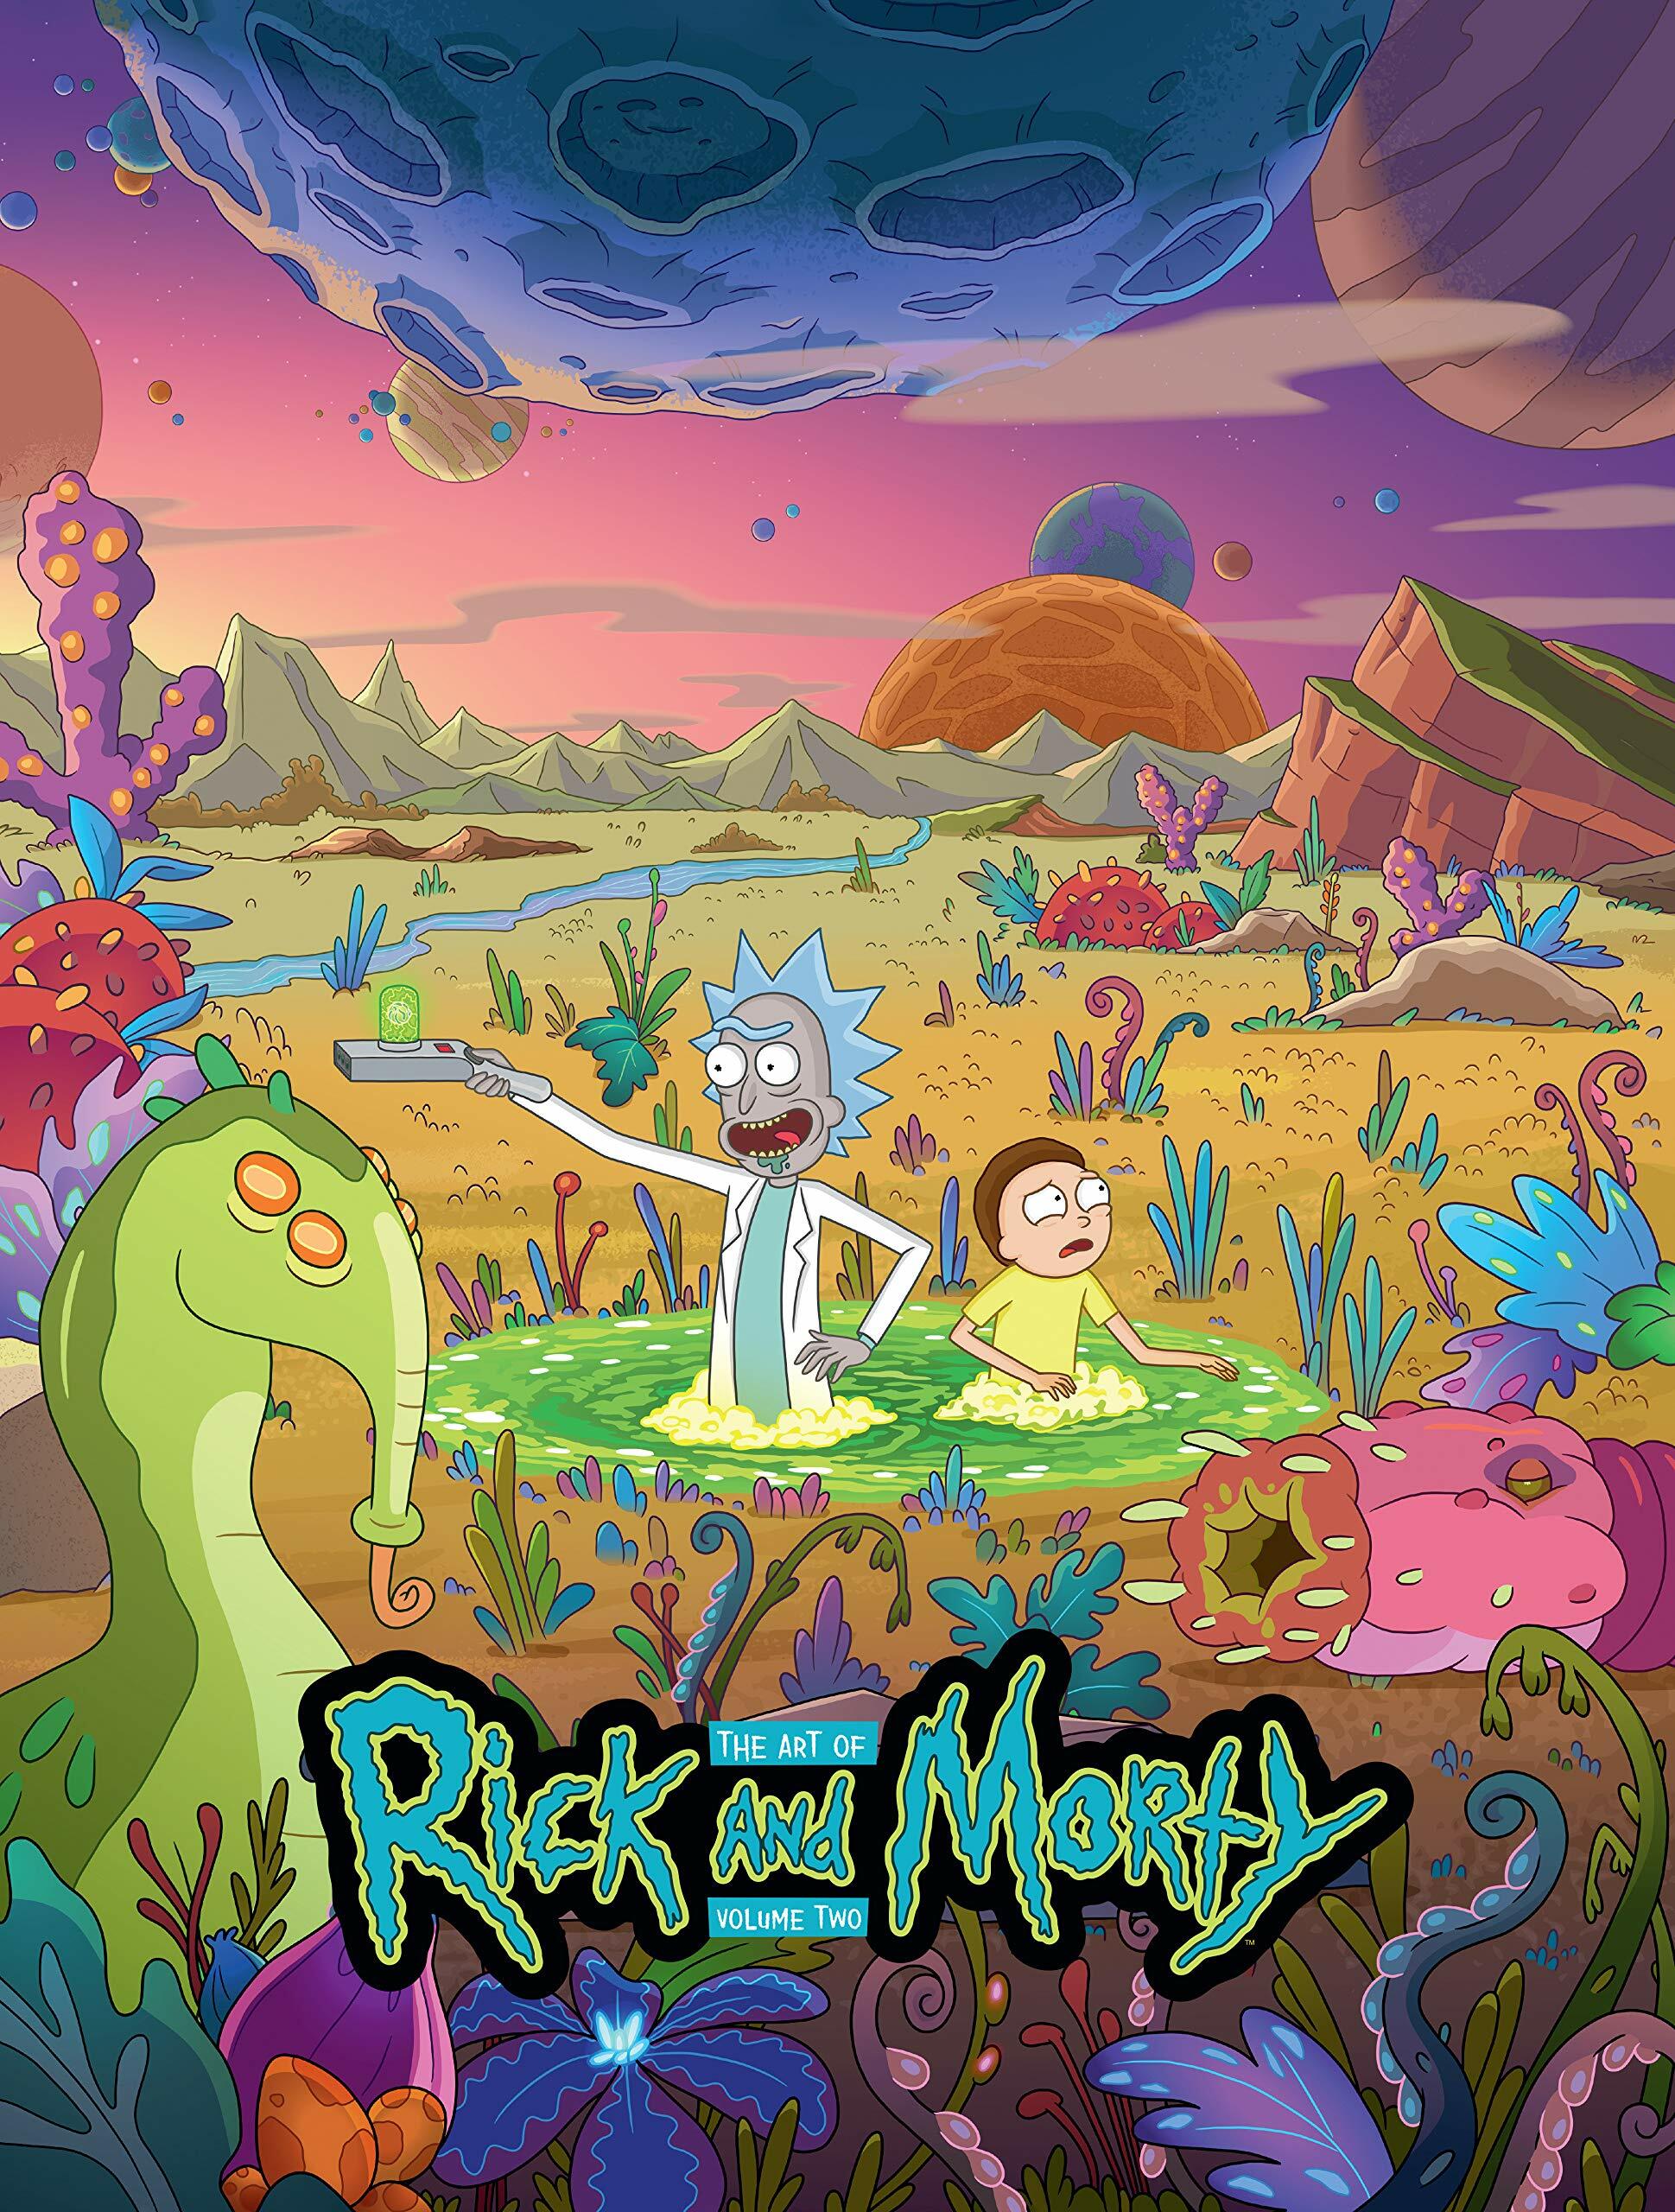 The Art of Rick and Morty Volume 2 (Hardcover)